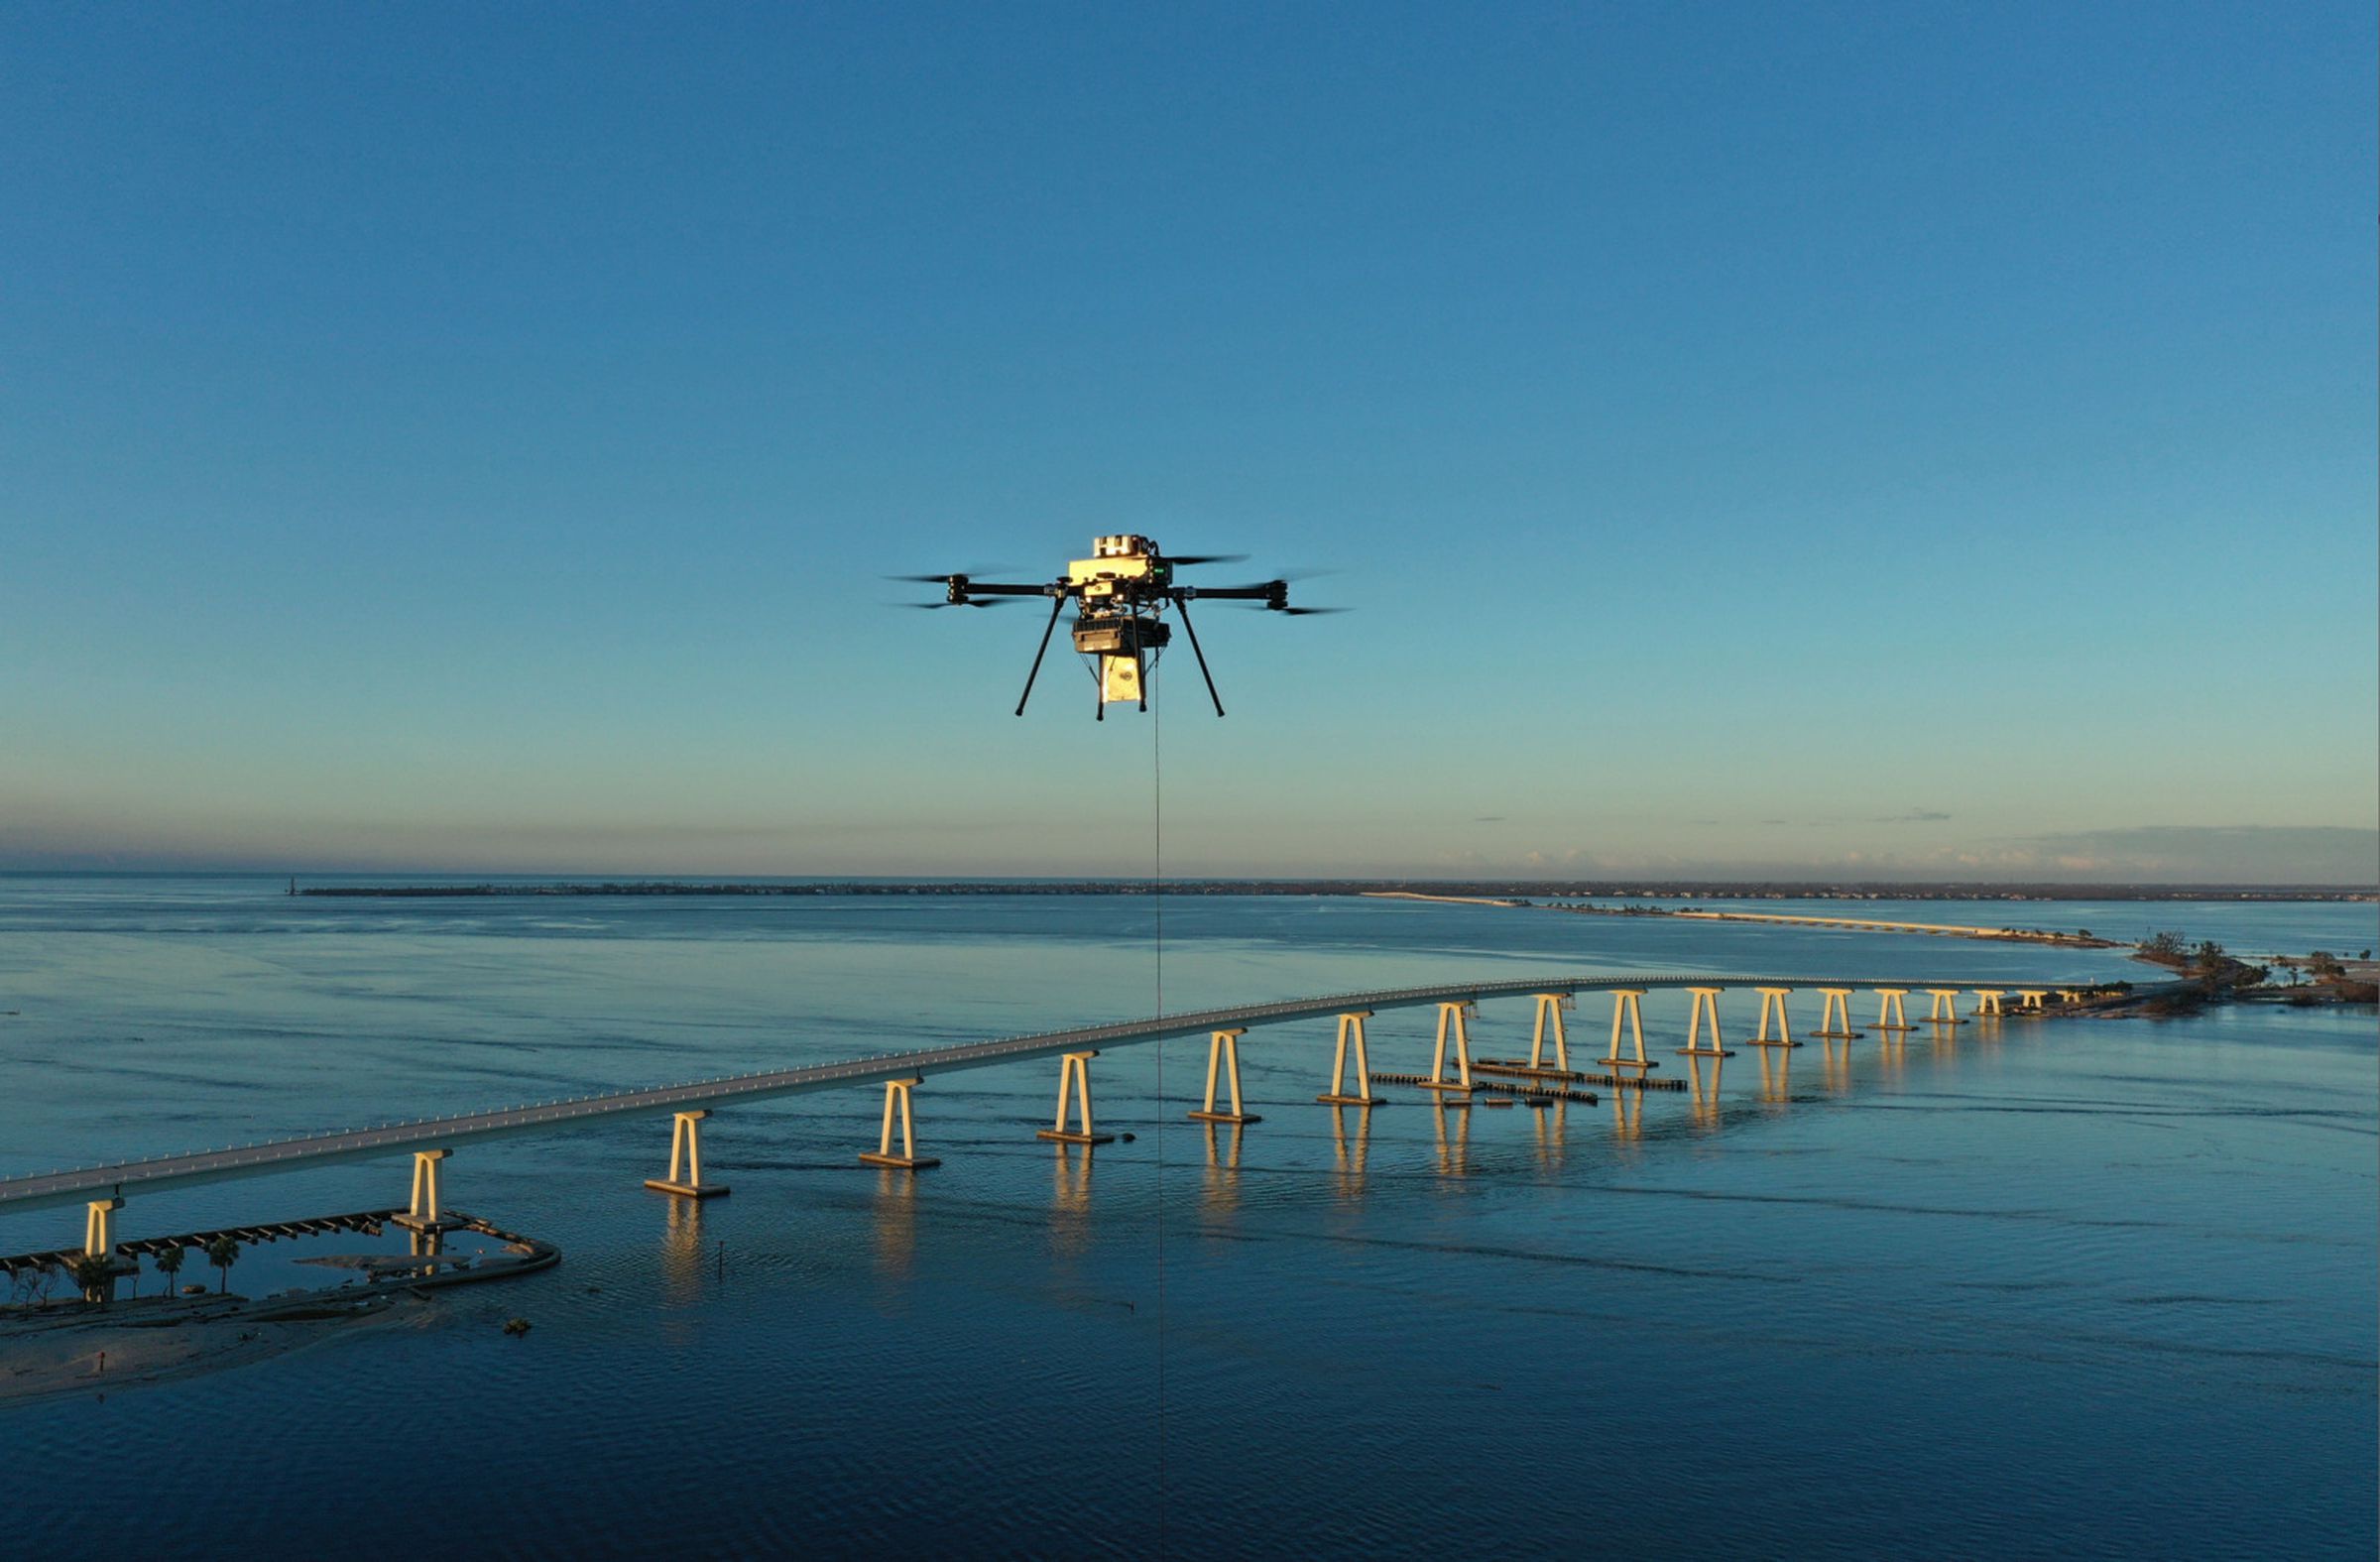 Image of a drone flying above a bridge over the ocean.